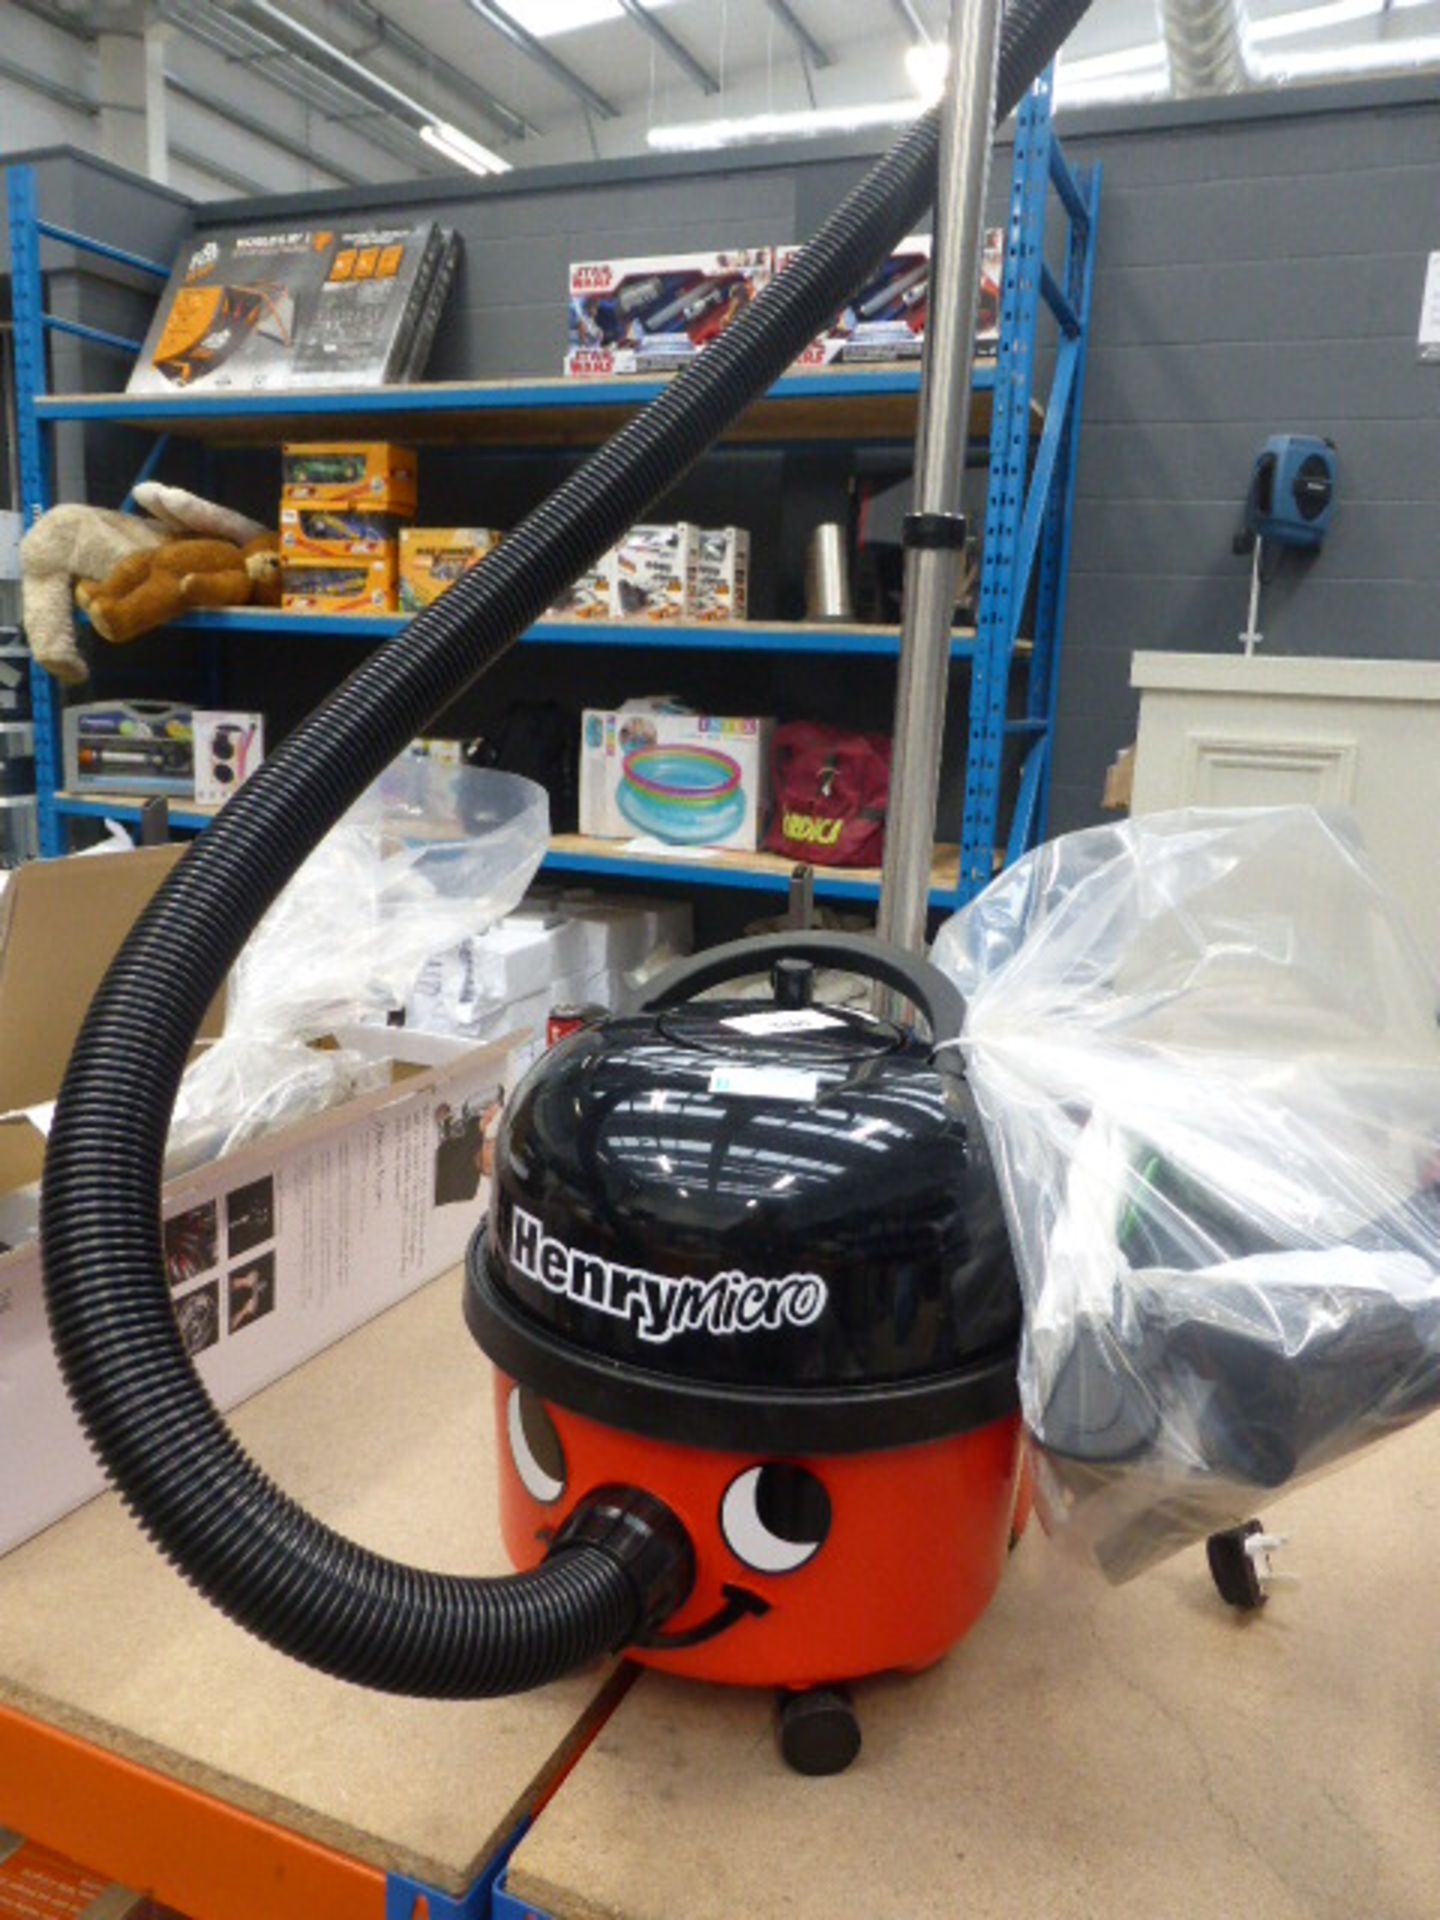 Henry micro vacuum cleaner with pole and accessories